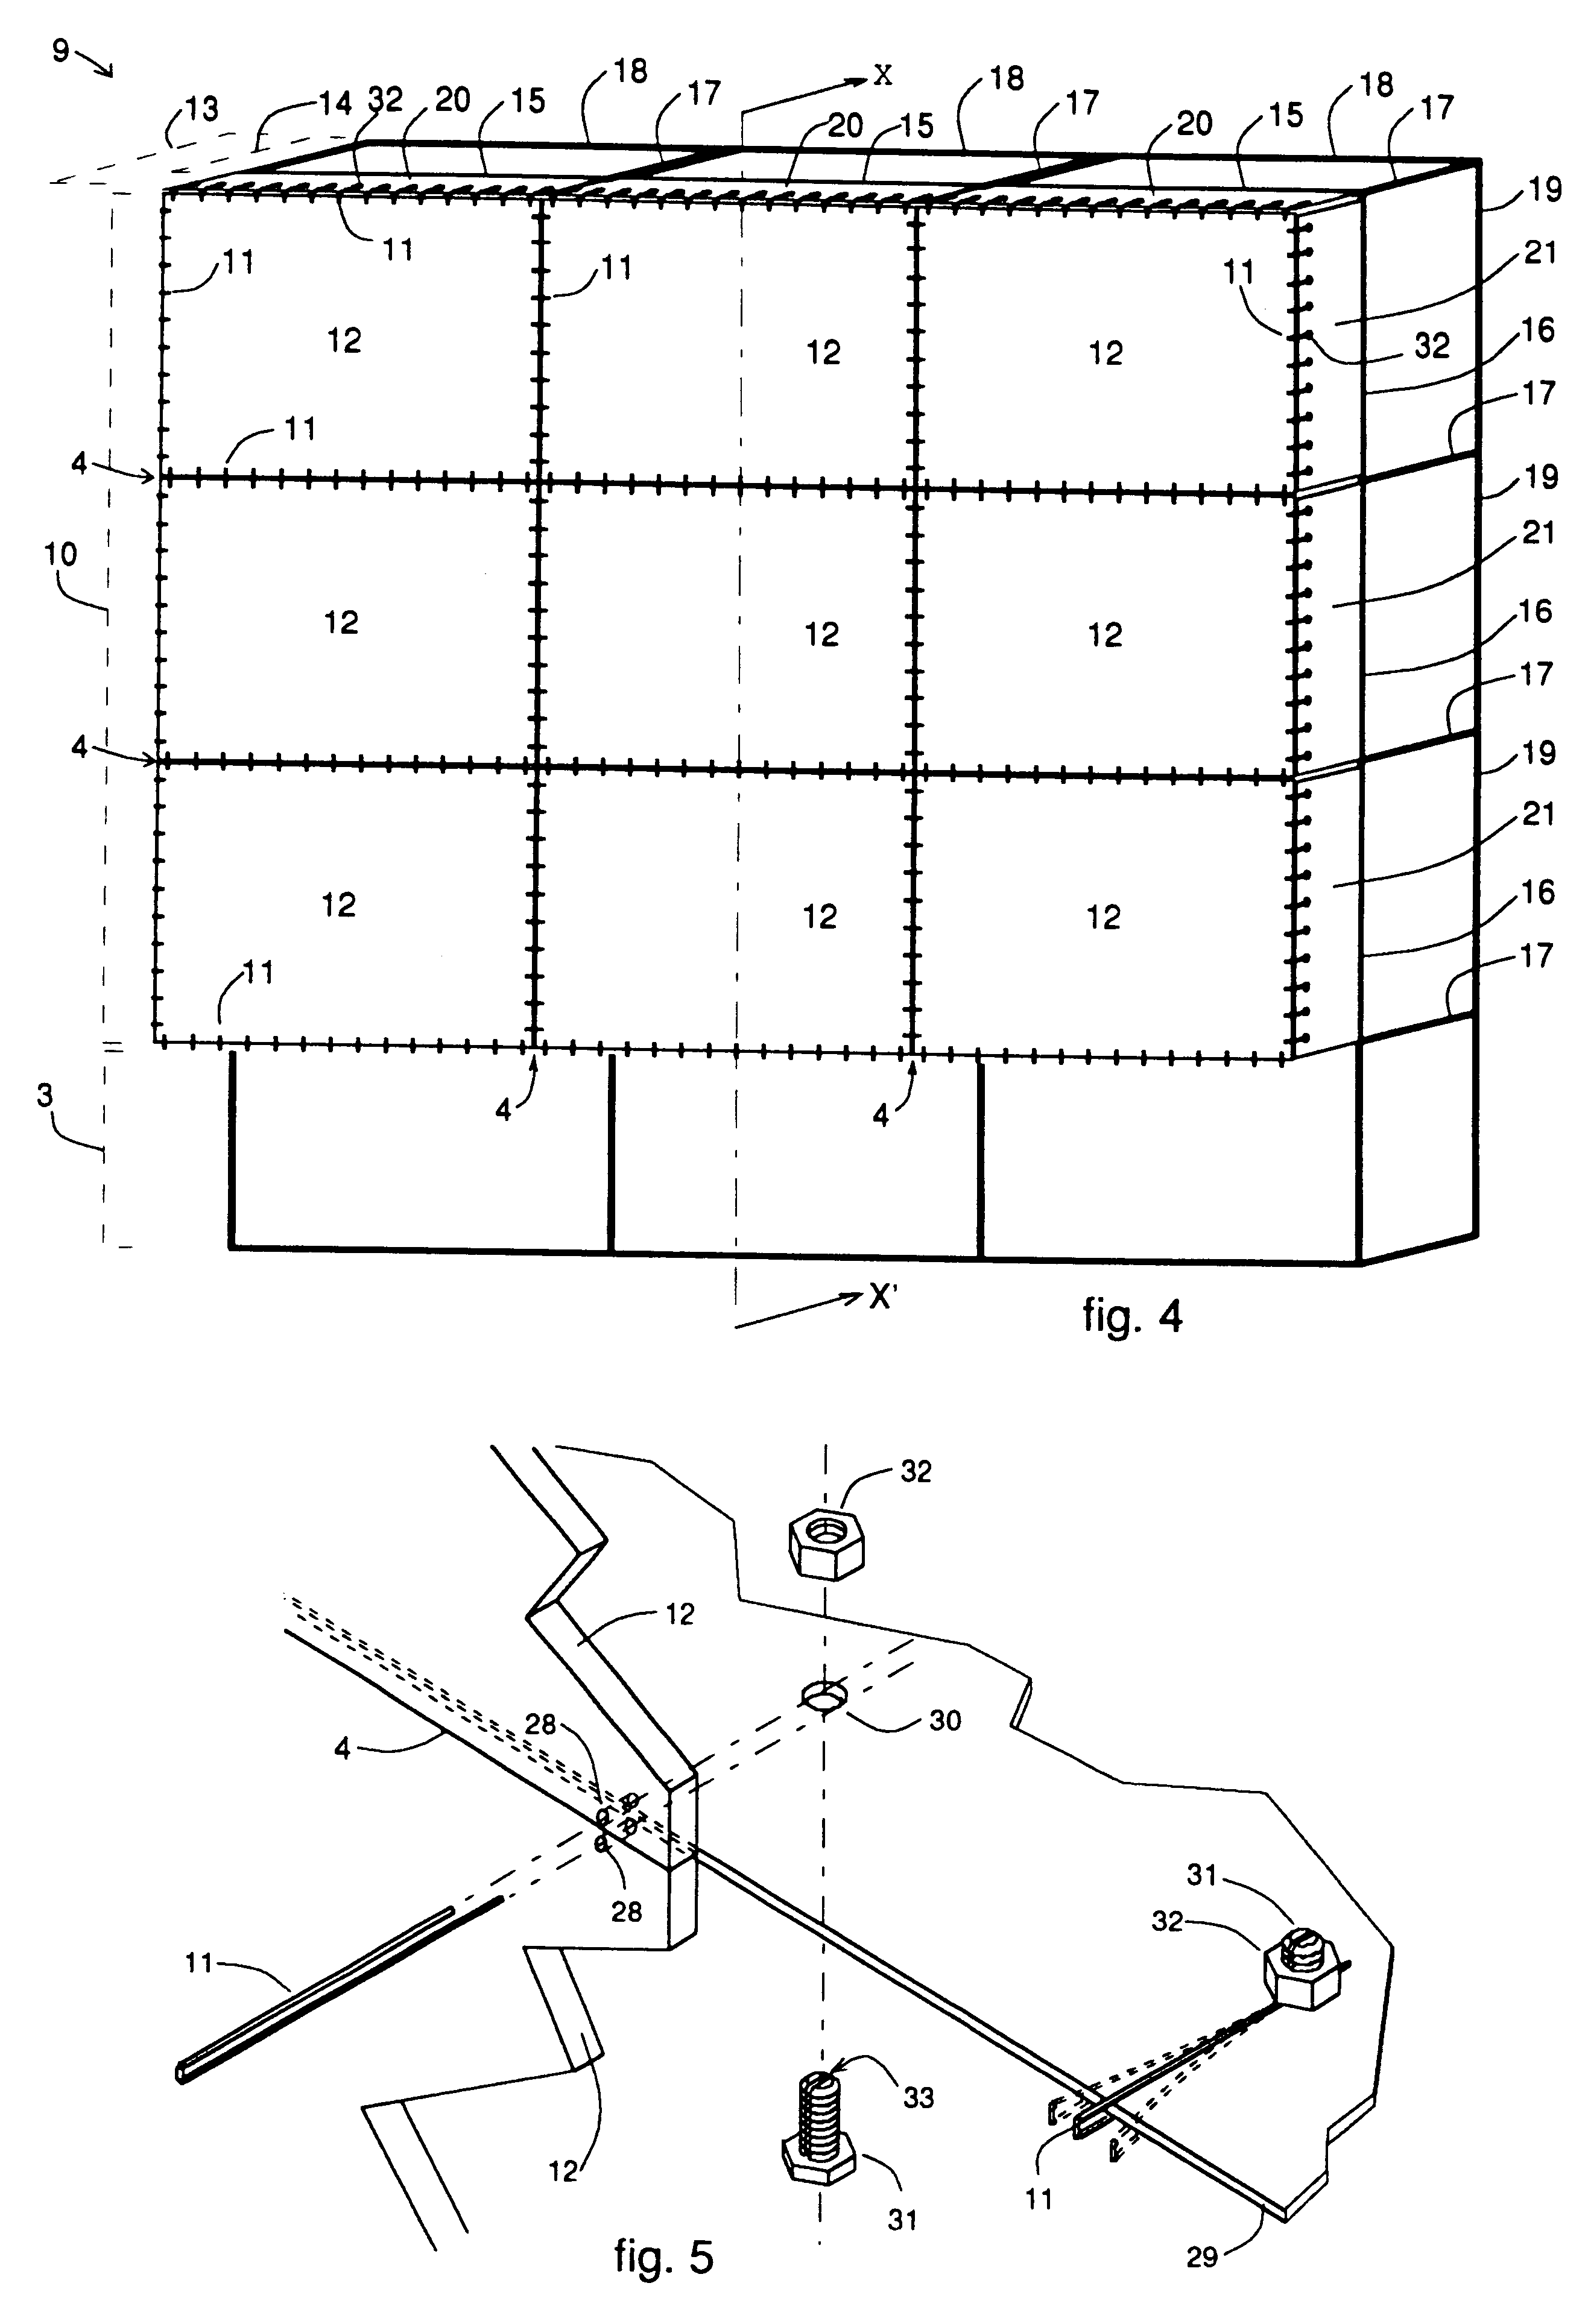 Projection screen for image reproduction devices which are positioned next to and/or above one another